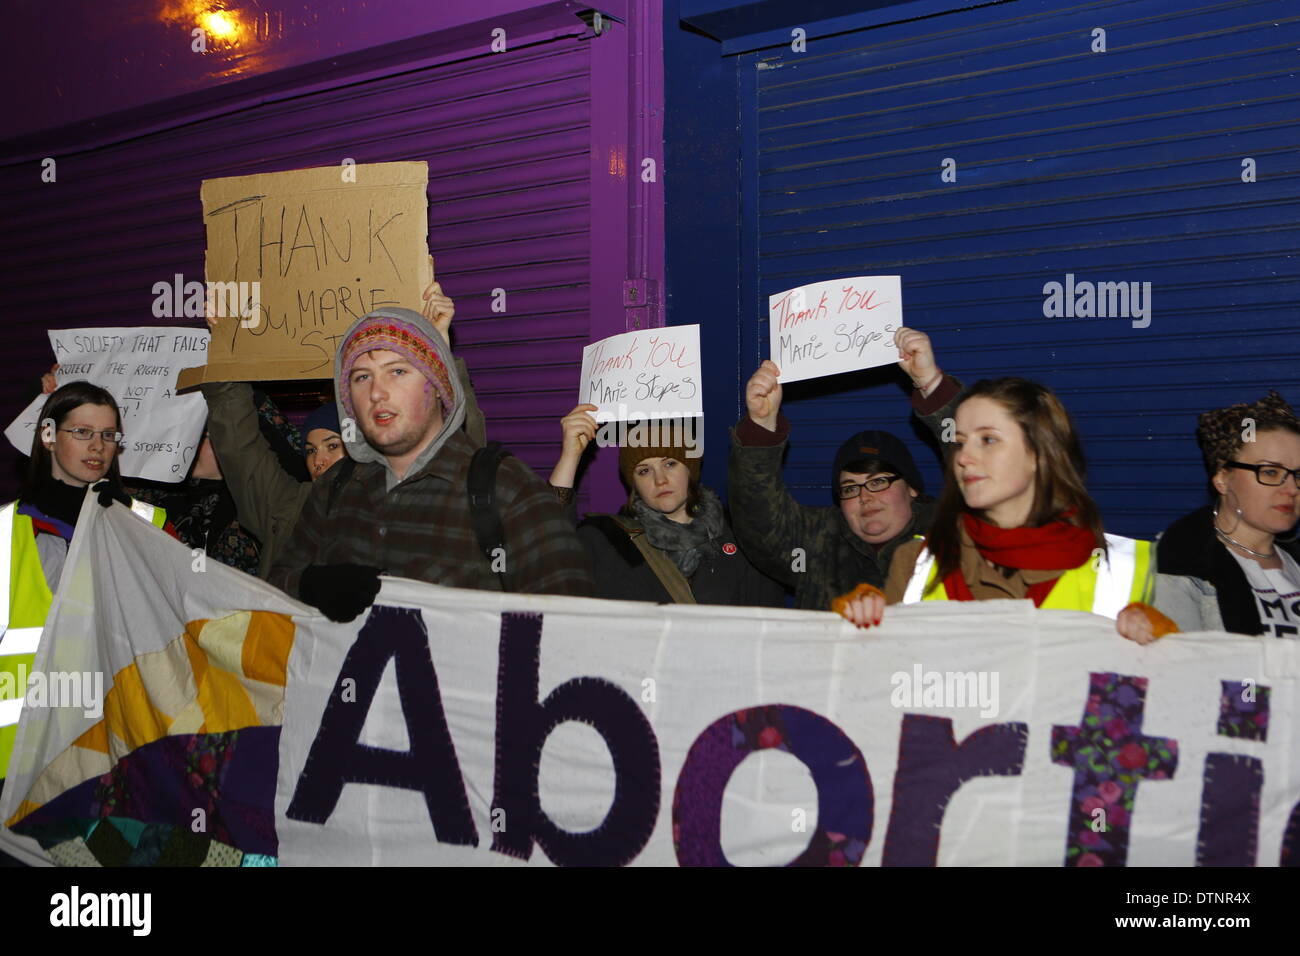 Dublin, Ireland. 21st February 2014. Activists stand outside the pro-life counselling office holding up signs in support of the Marie Stopes Centre. Irish pro-choice activists protested outside the counselling offices of Good Counsel Network Ireland in Dublin. The offices are located directly next to a Marie Stopes Centre, which provides pro-choice pregnancy counselling services. Credit:  Michael Debets/Alamy Live News Stock Photo